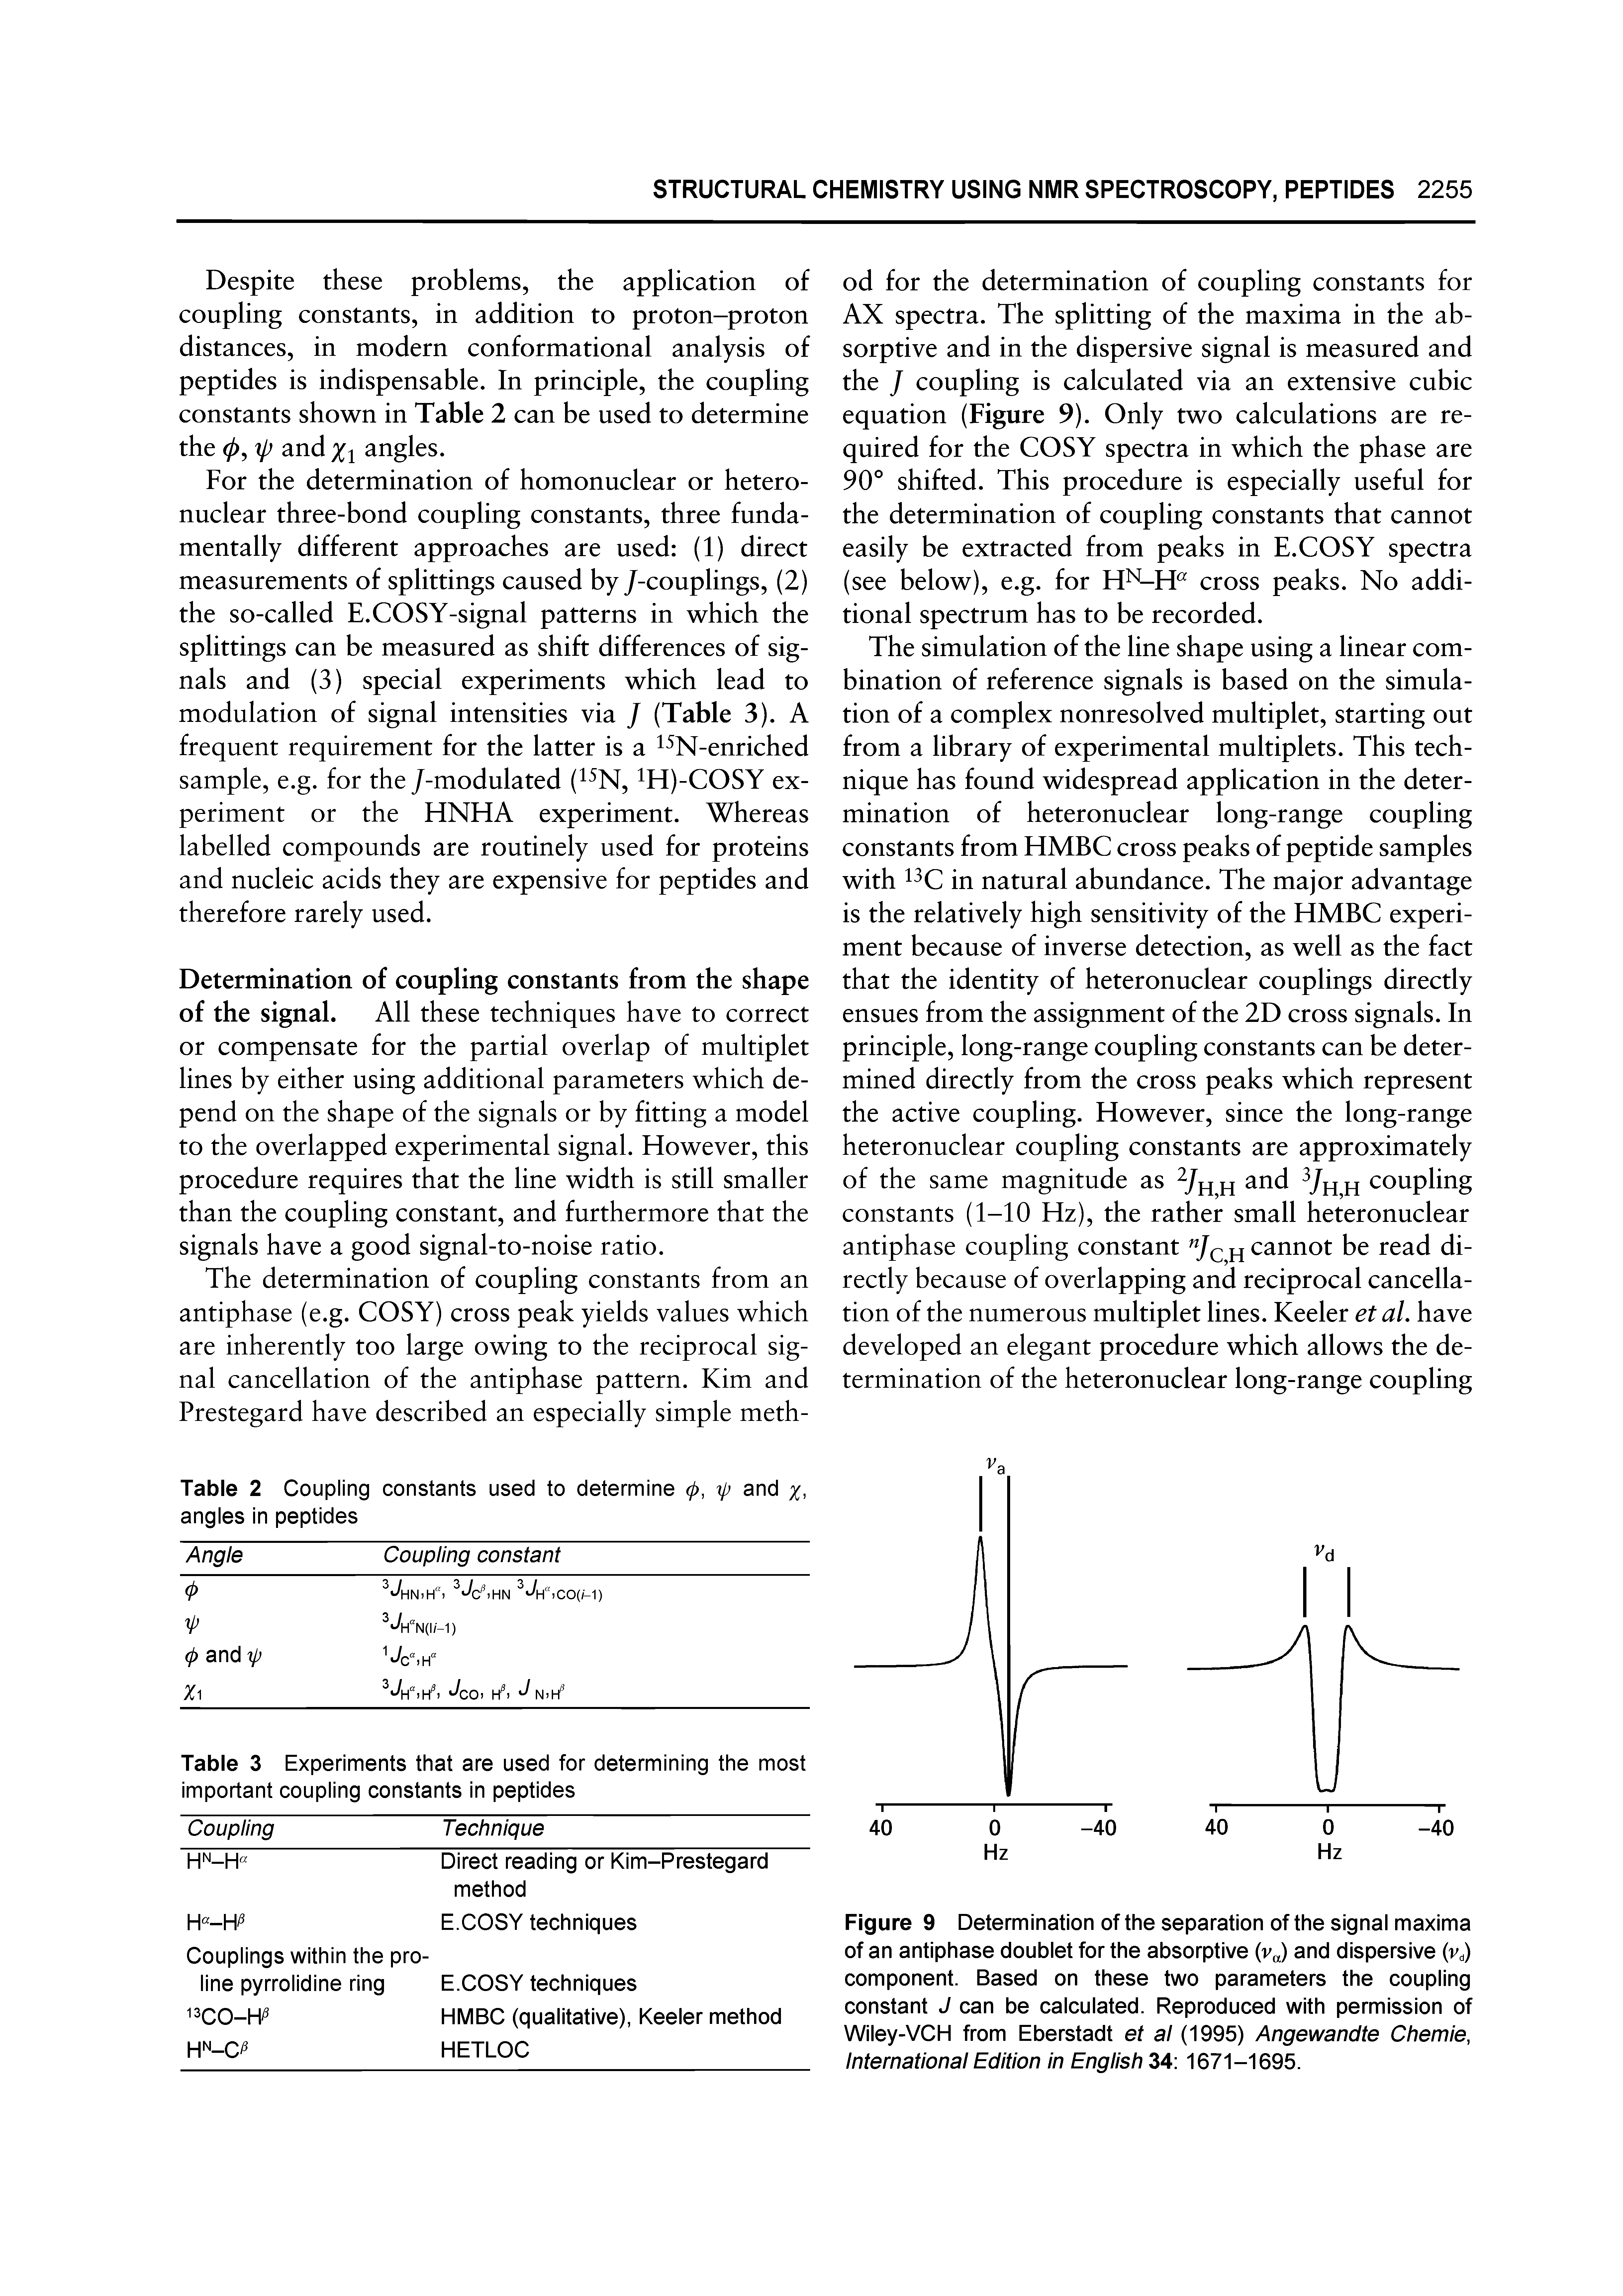 Figure 9 Determination of the separation of the signal maxima of an antiphase doublet for the absorptive (vj and dispersive W component. Based on these two parameters the coupling constant J can be calculated. Reproduced with permission of Wiley-VCH from Eberstadt et al (1995) Angewandte Chemie, International Edition in English 34 1671-1695.